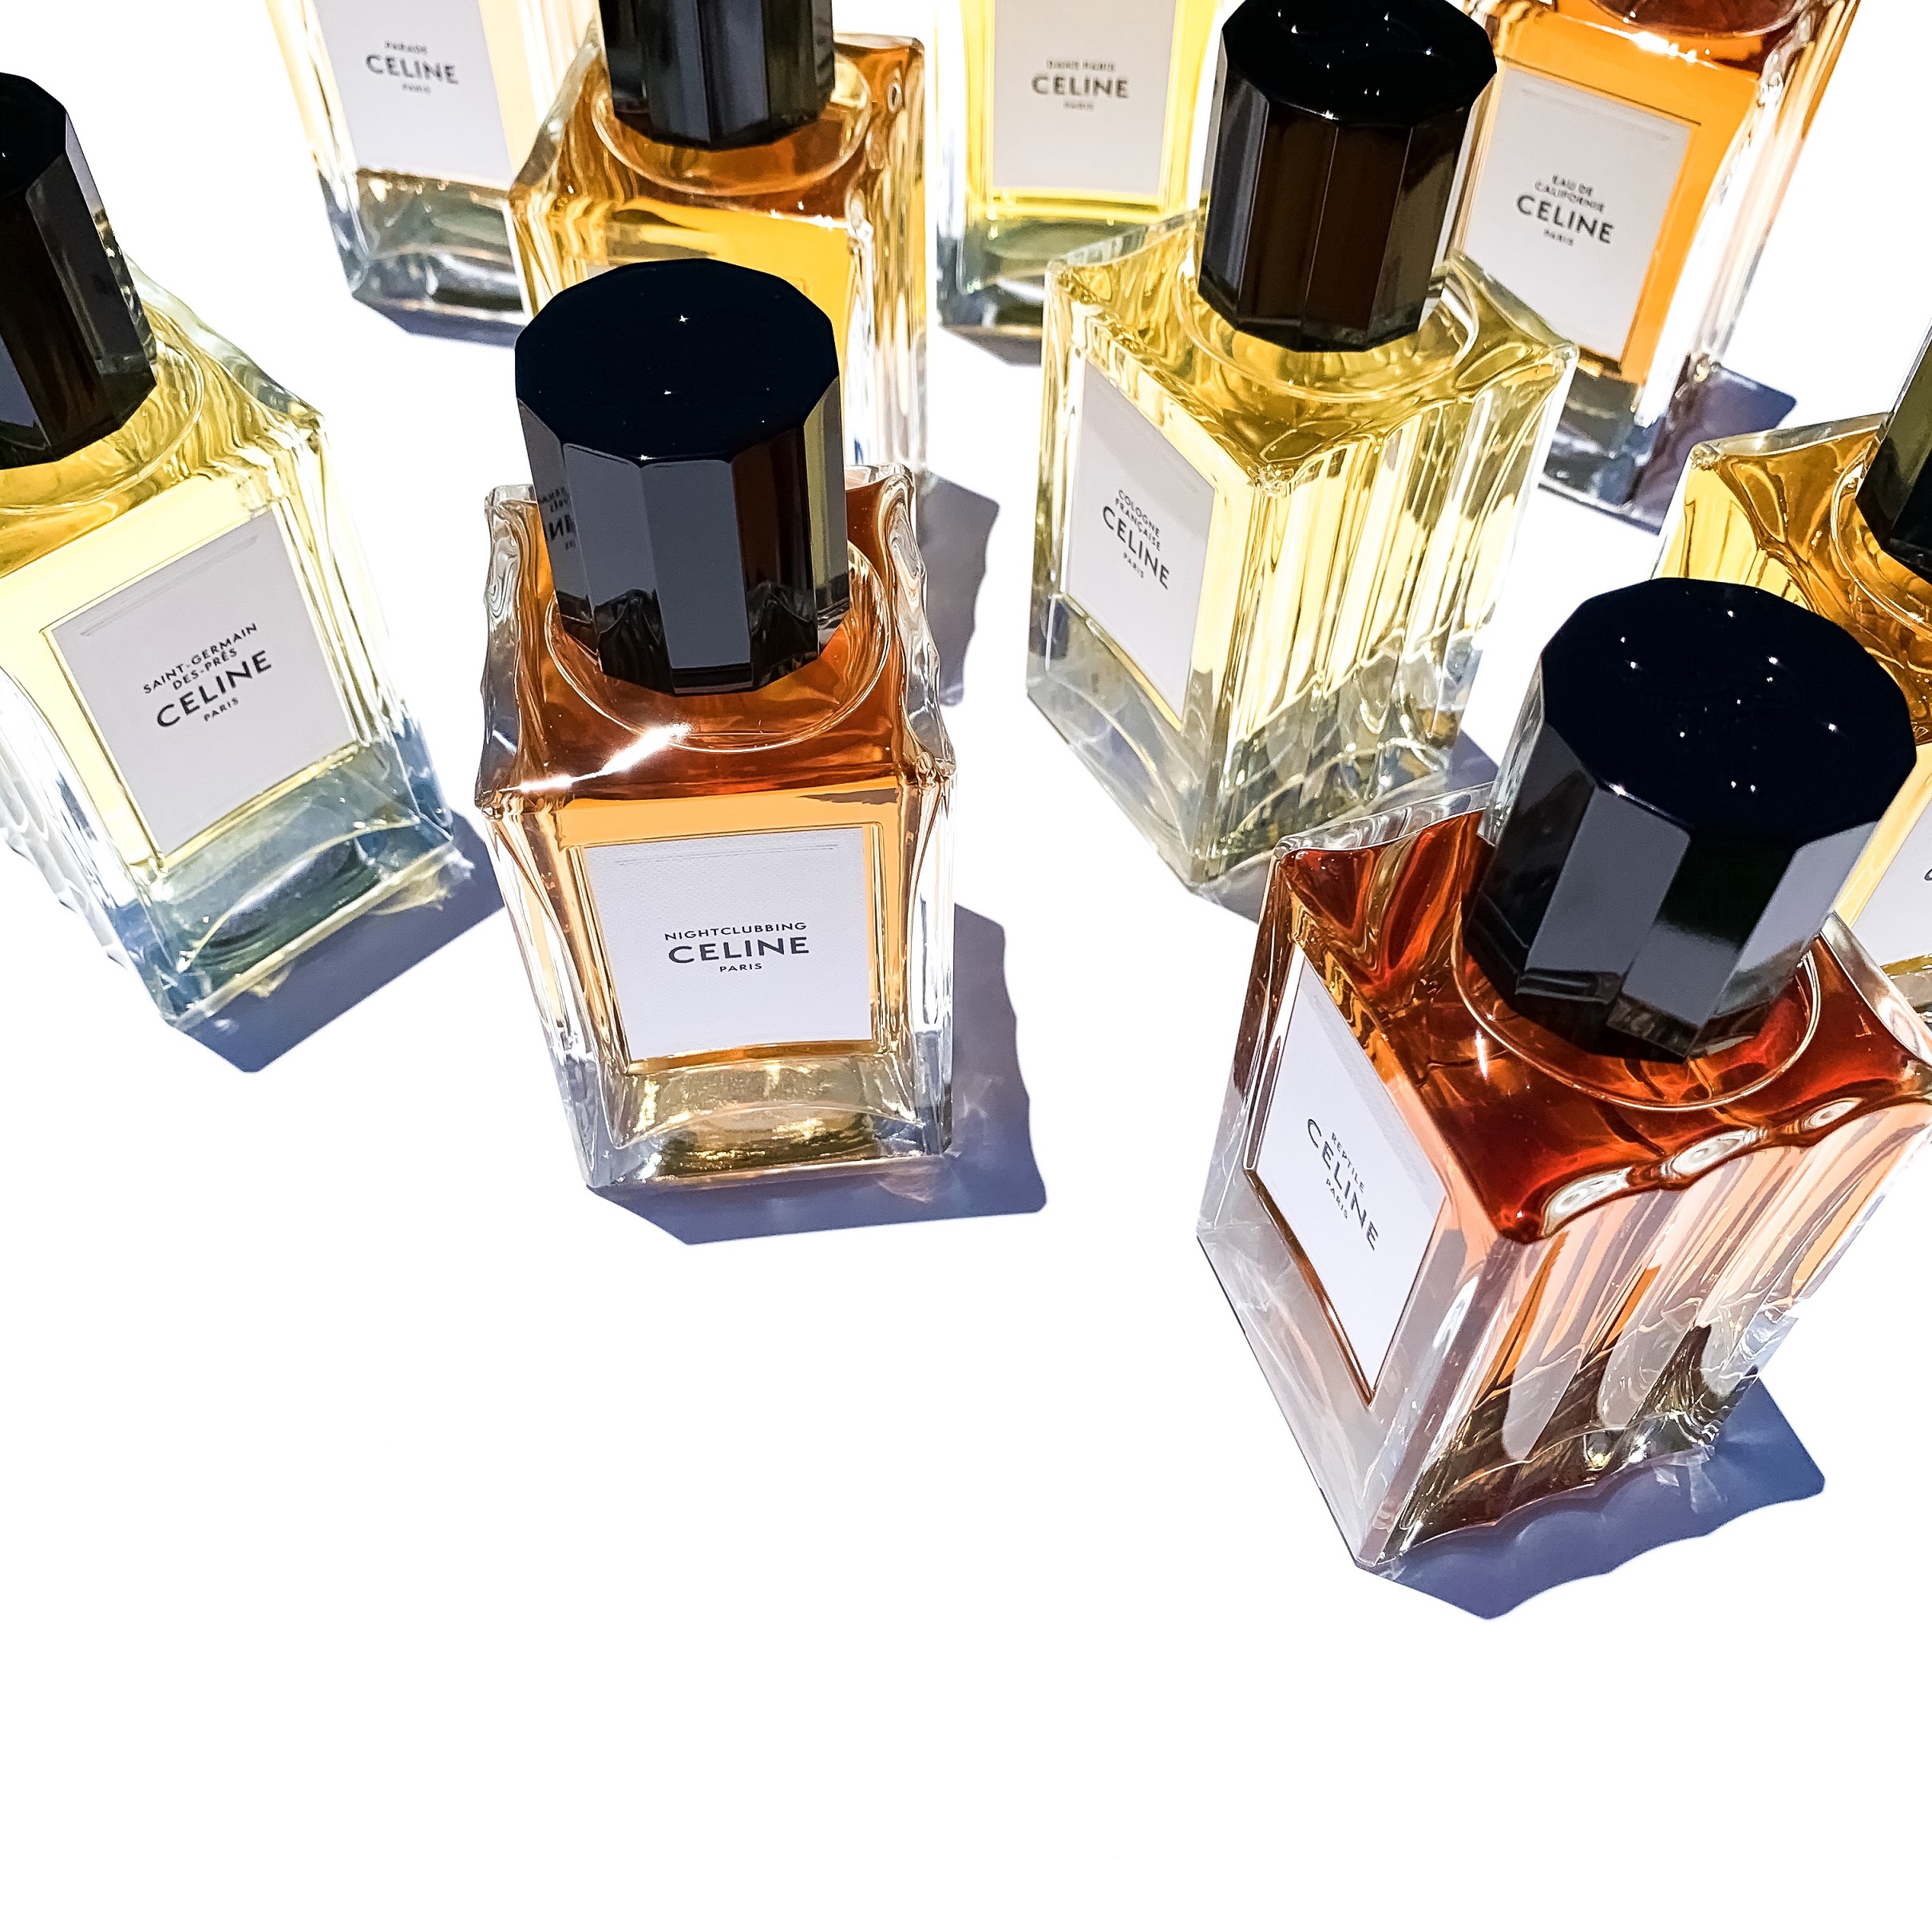 Celine diversifies: opens in Paris its first perfume store